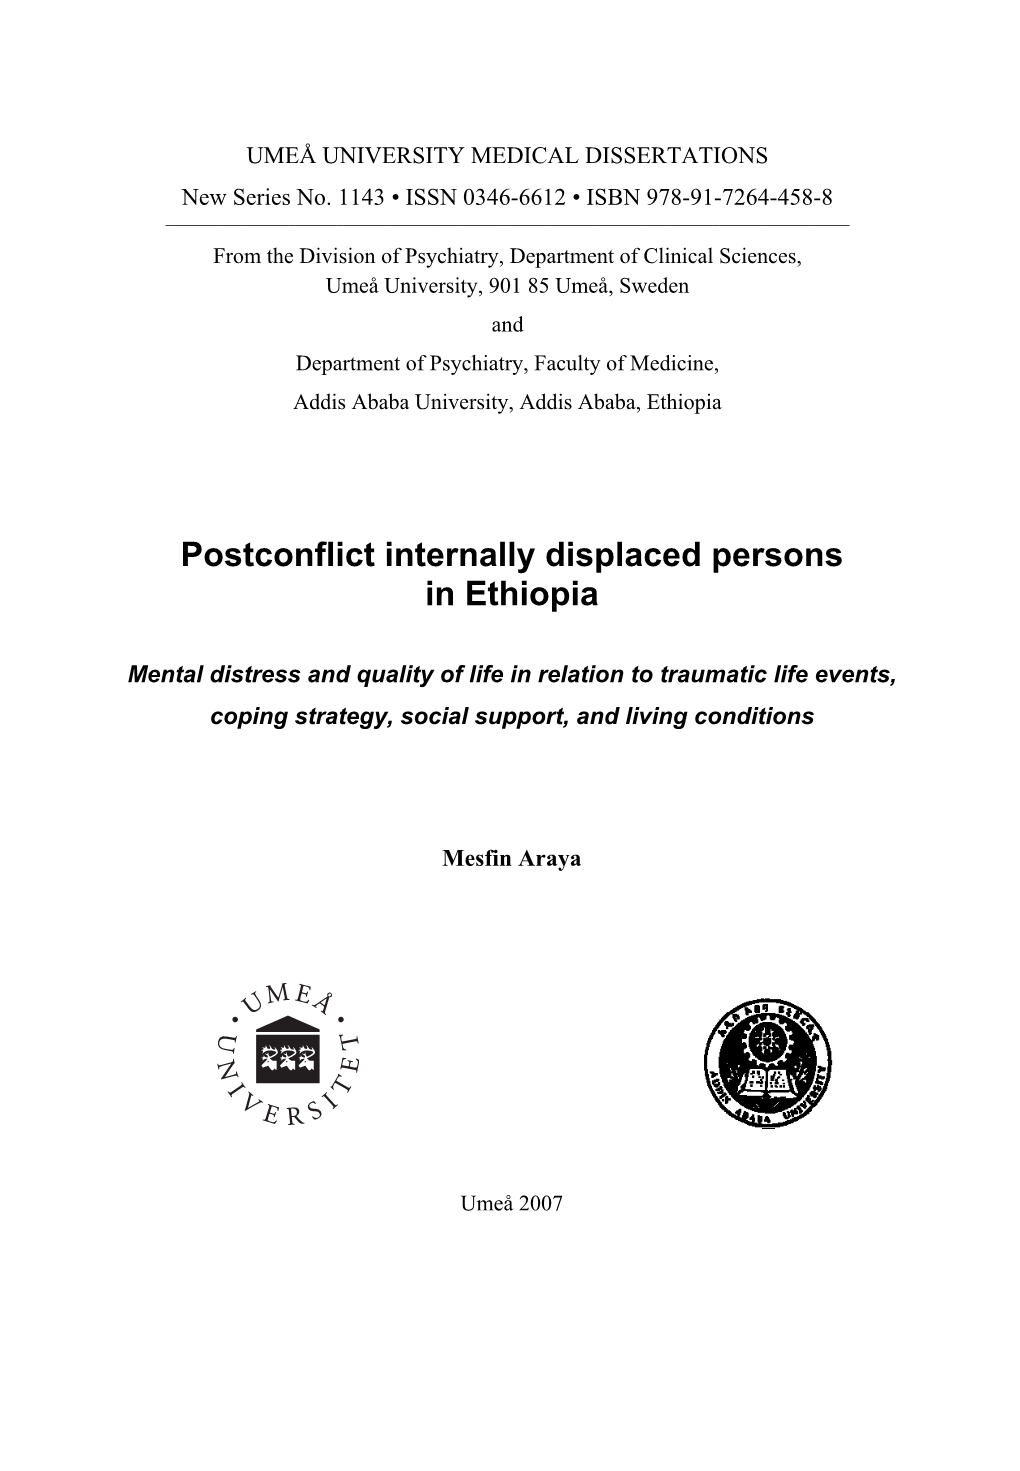 Postconflict Internally Displaced Persons in Ethiopia